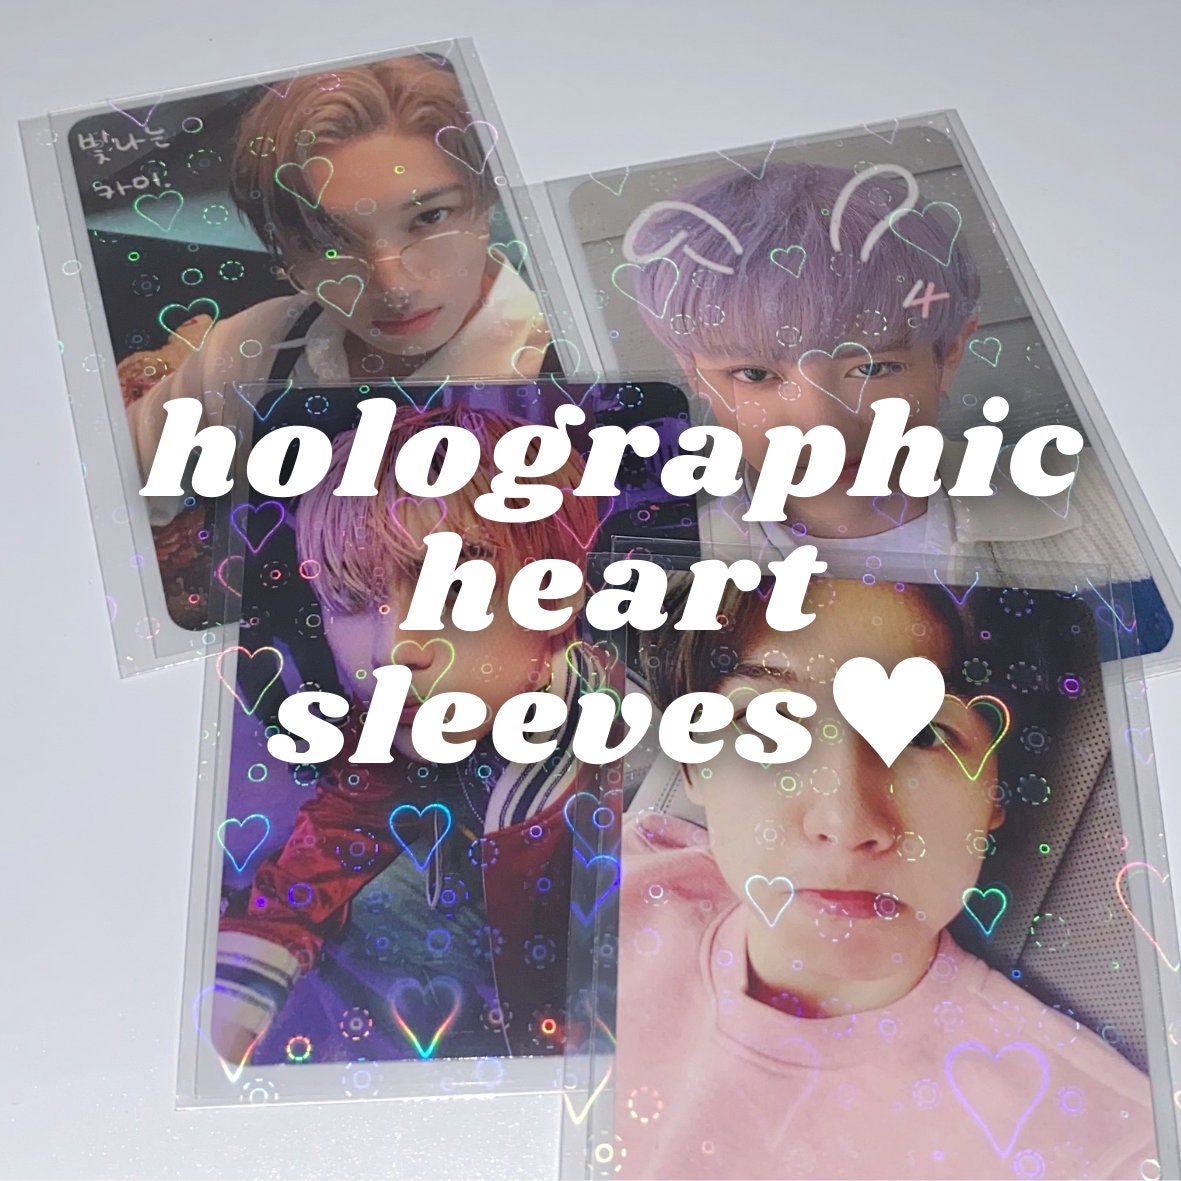 Kpop Polco Photocard Phone Polaroid Toploader Deco Kit Stickers, Washi  Tape, Holo Sleeves, and Toploaders for Trading and Decorating 